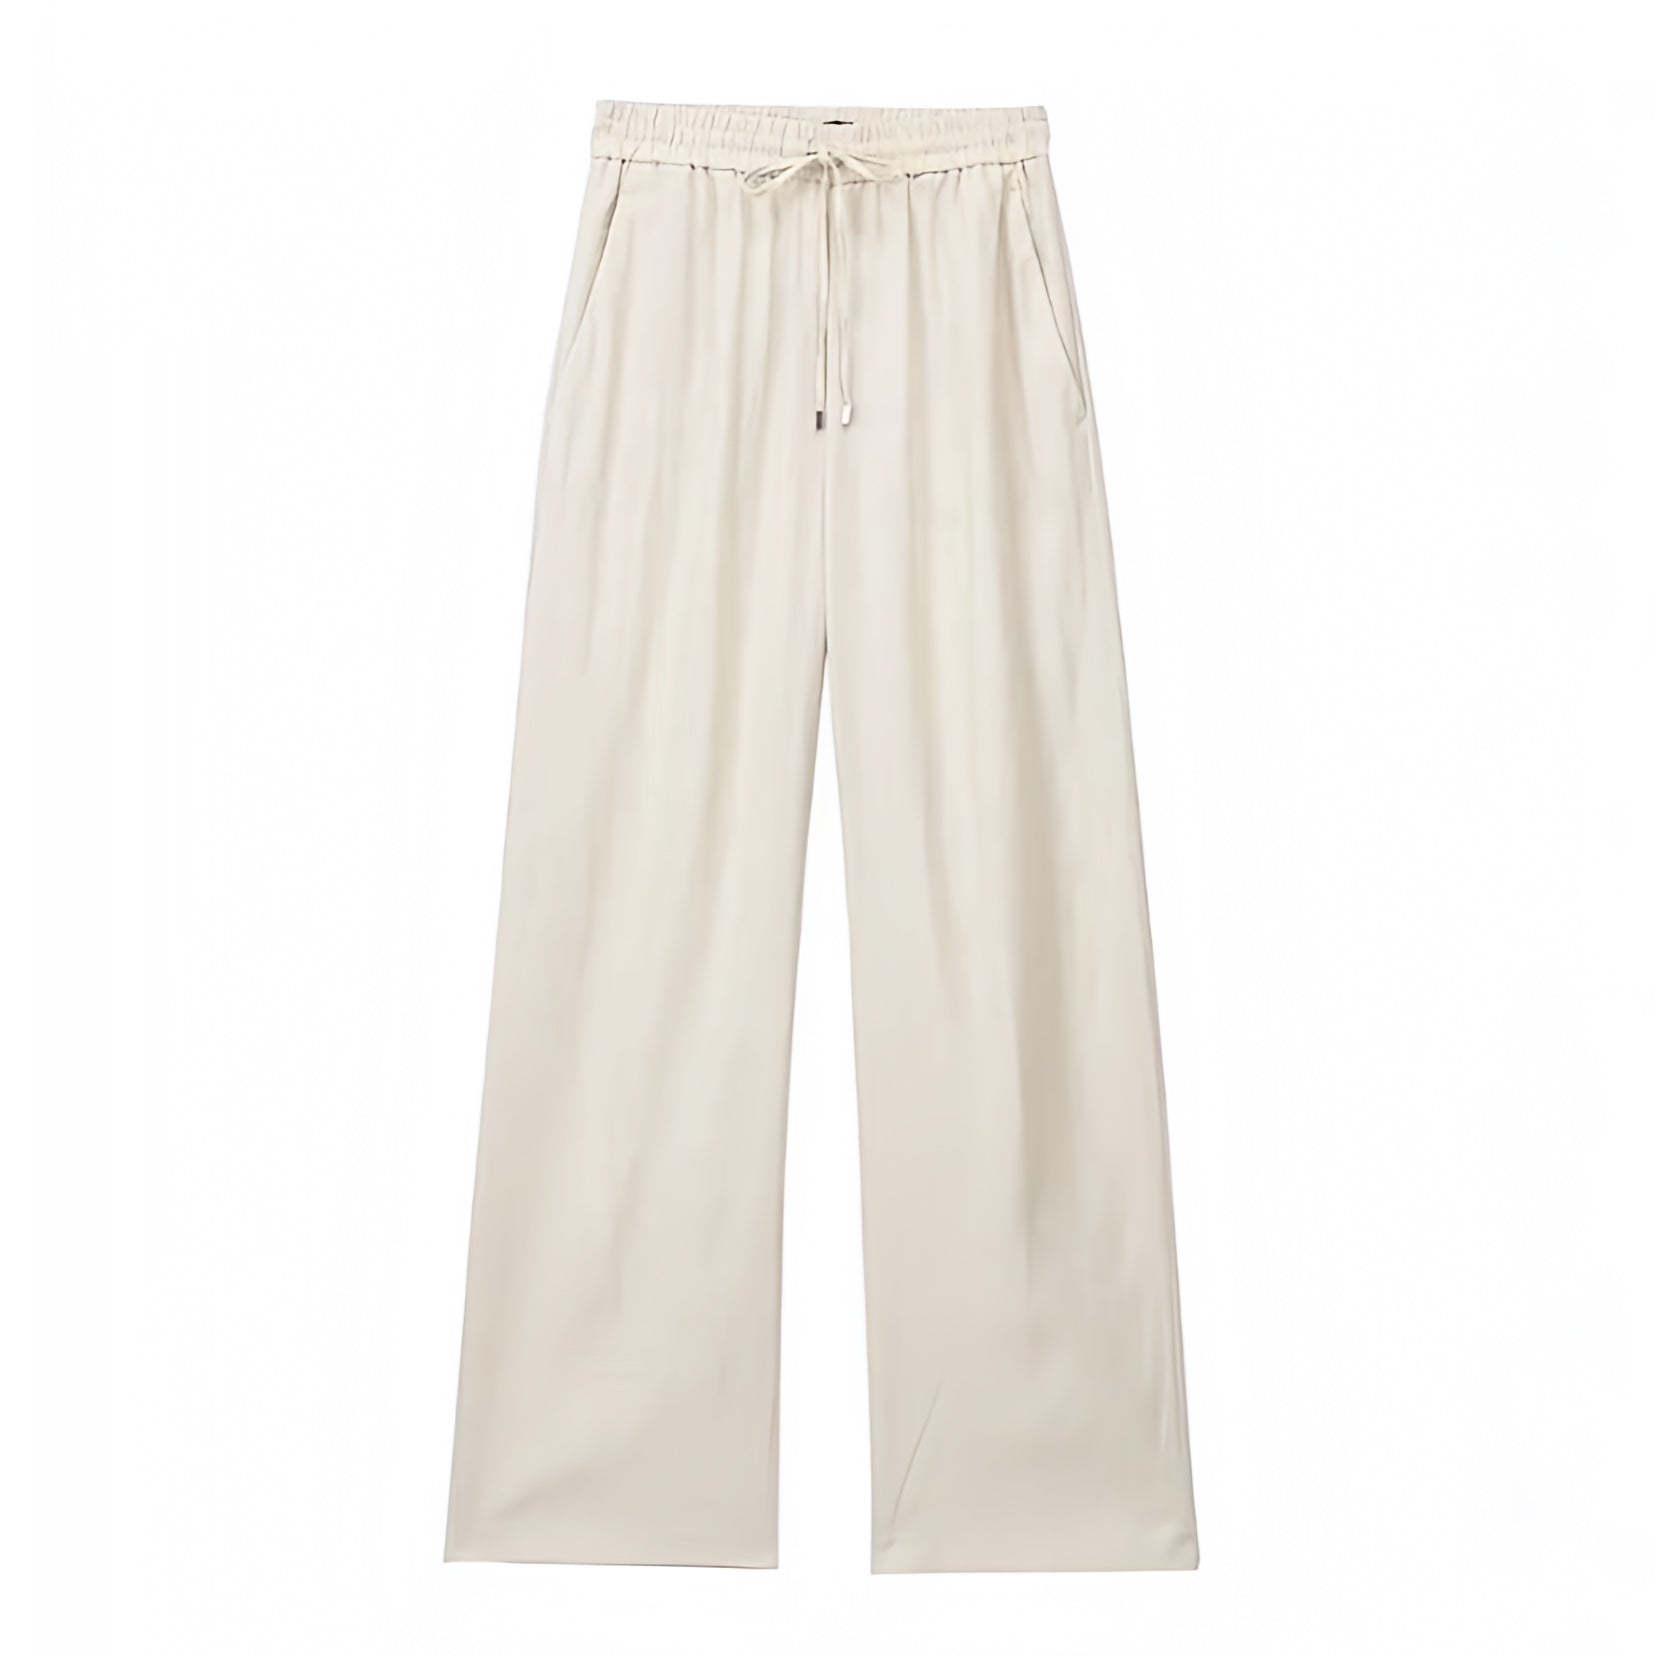 Ladies Women Linen Trousers Casual Summer Holiday Pant Elasticated Waist  Bottoms